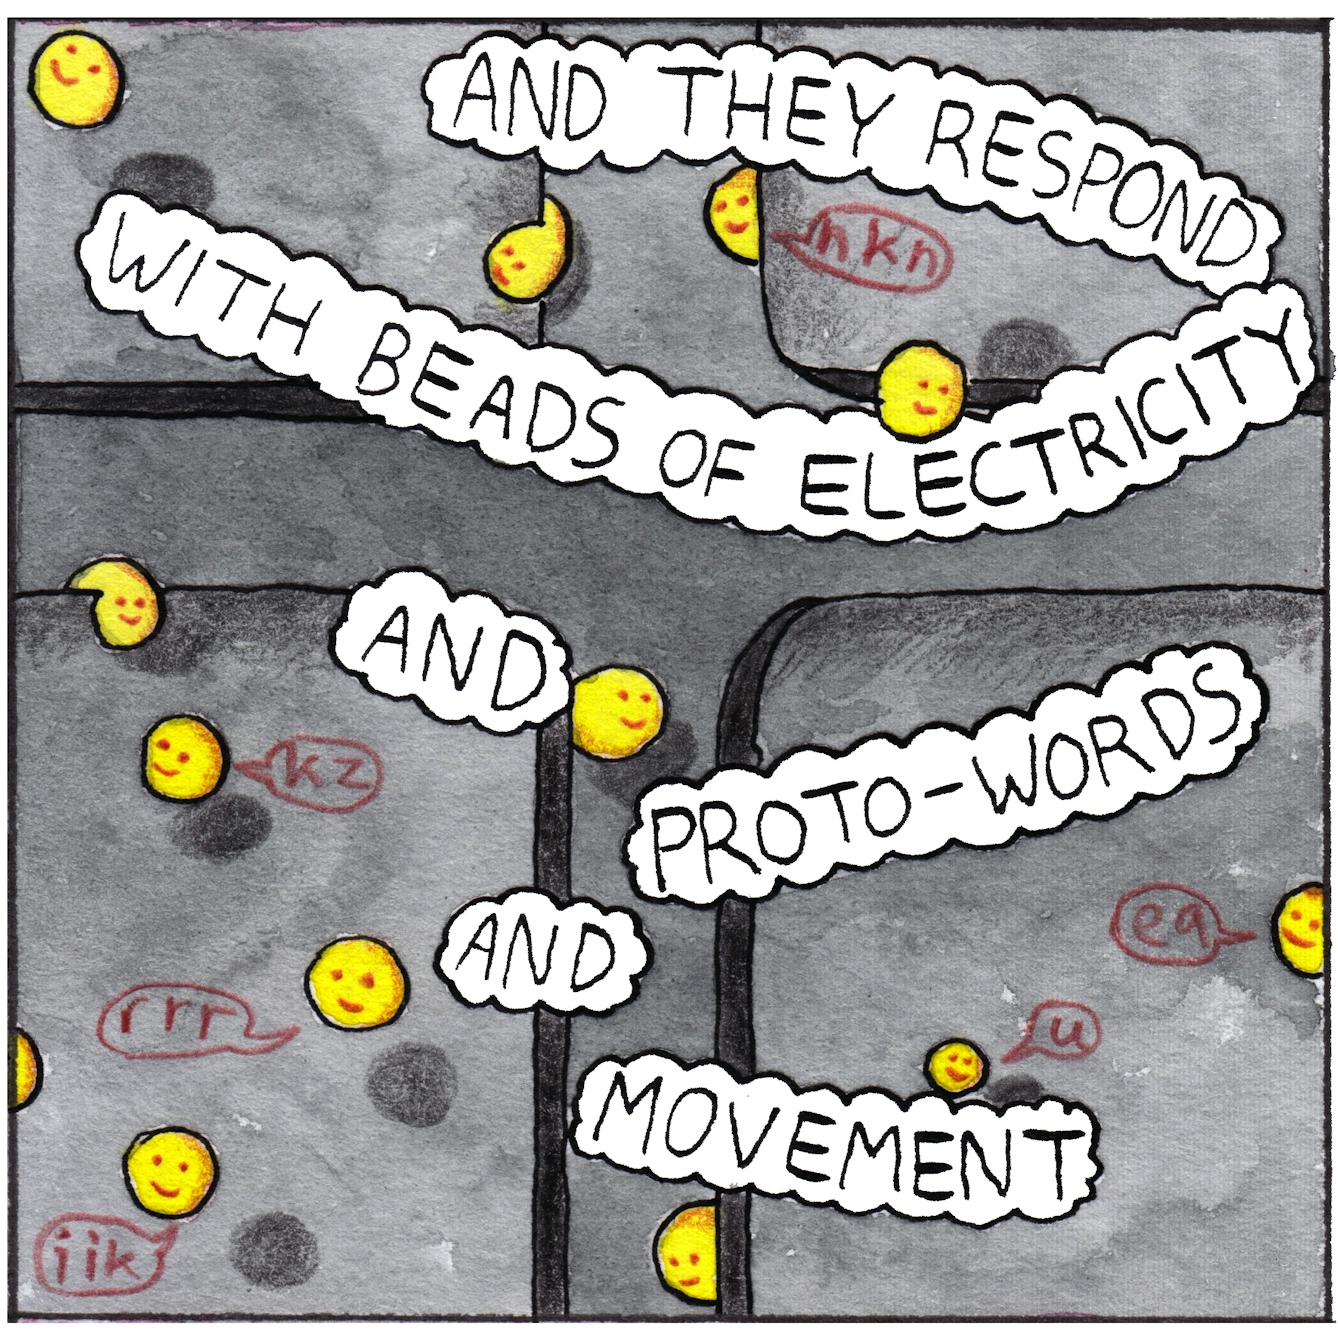 Panel four of the webcomic 'Doing emails' shows the intersection of four keys on a keyboard. Small globular 'organisms' with smiley faces emerge from the spaces beneath and between the keys, floating upwards. Small speech bubbles come from some of the creatures say things like "iik", "kz" and "ea". Bubbles of text flow across the panel saying: "And they respond with beads of electricity and proto-words and movement"